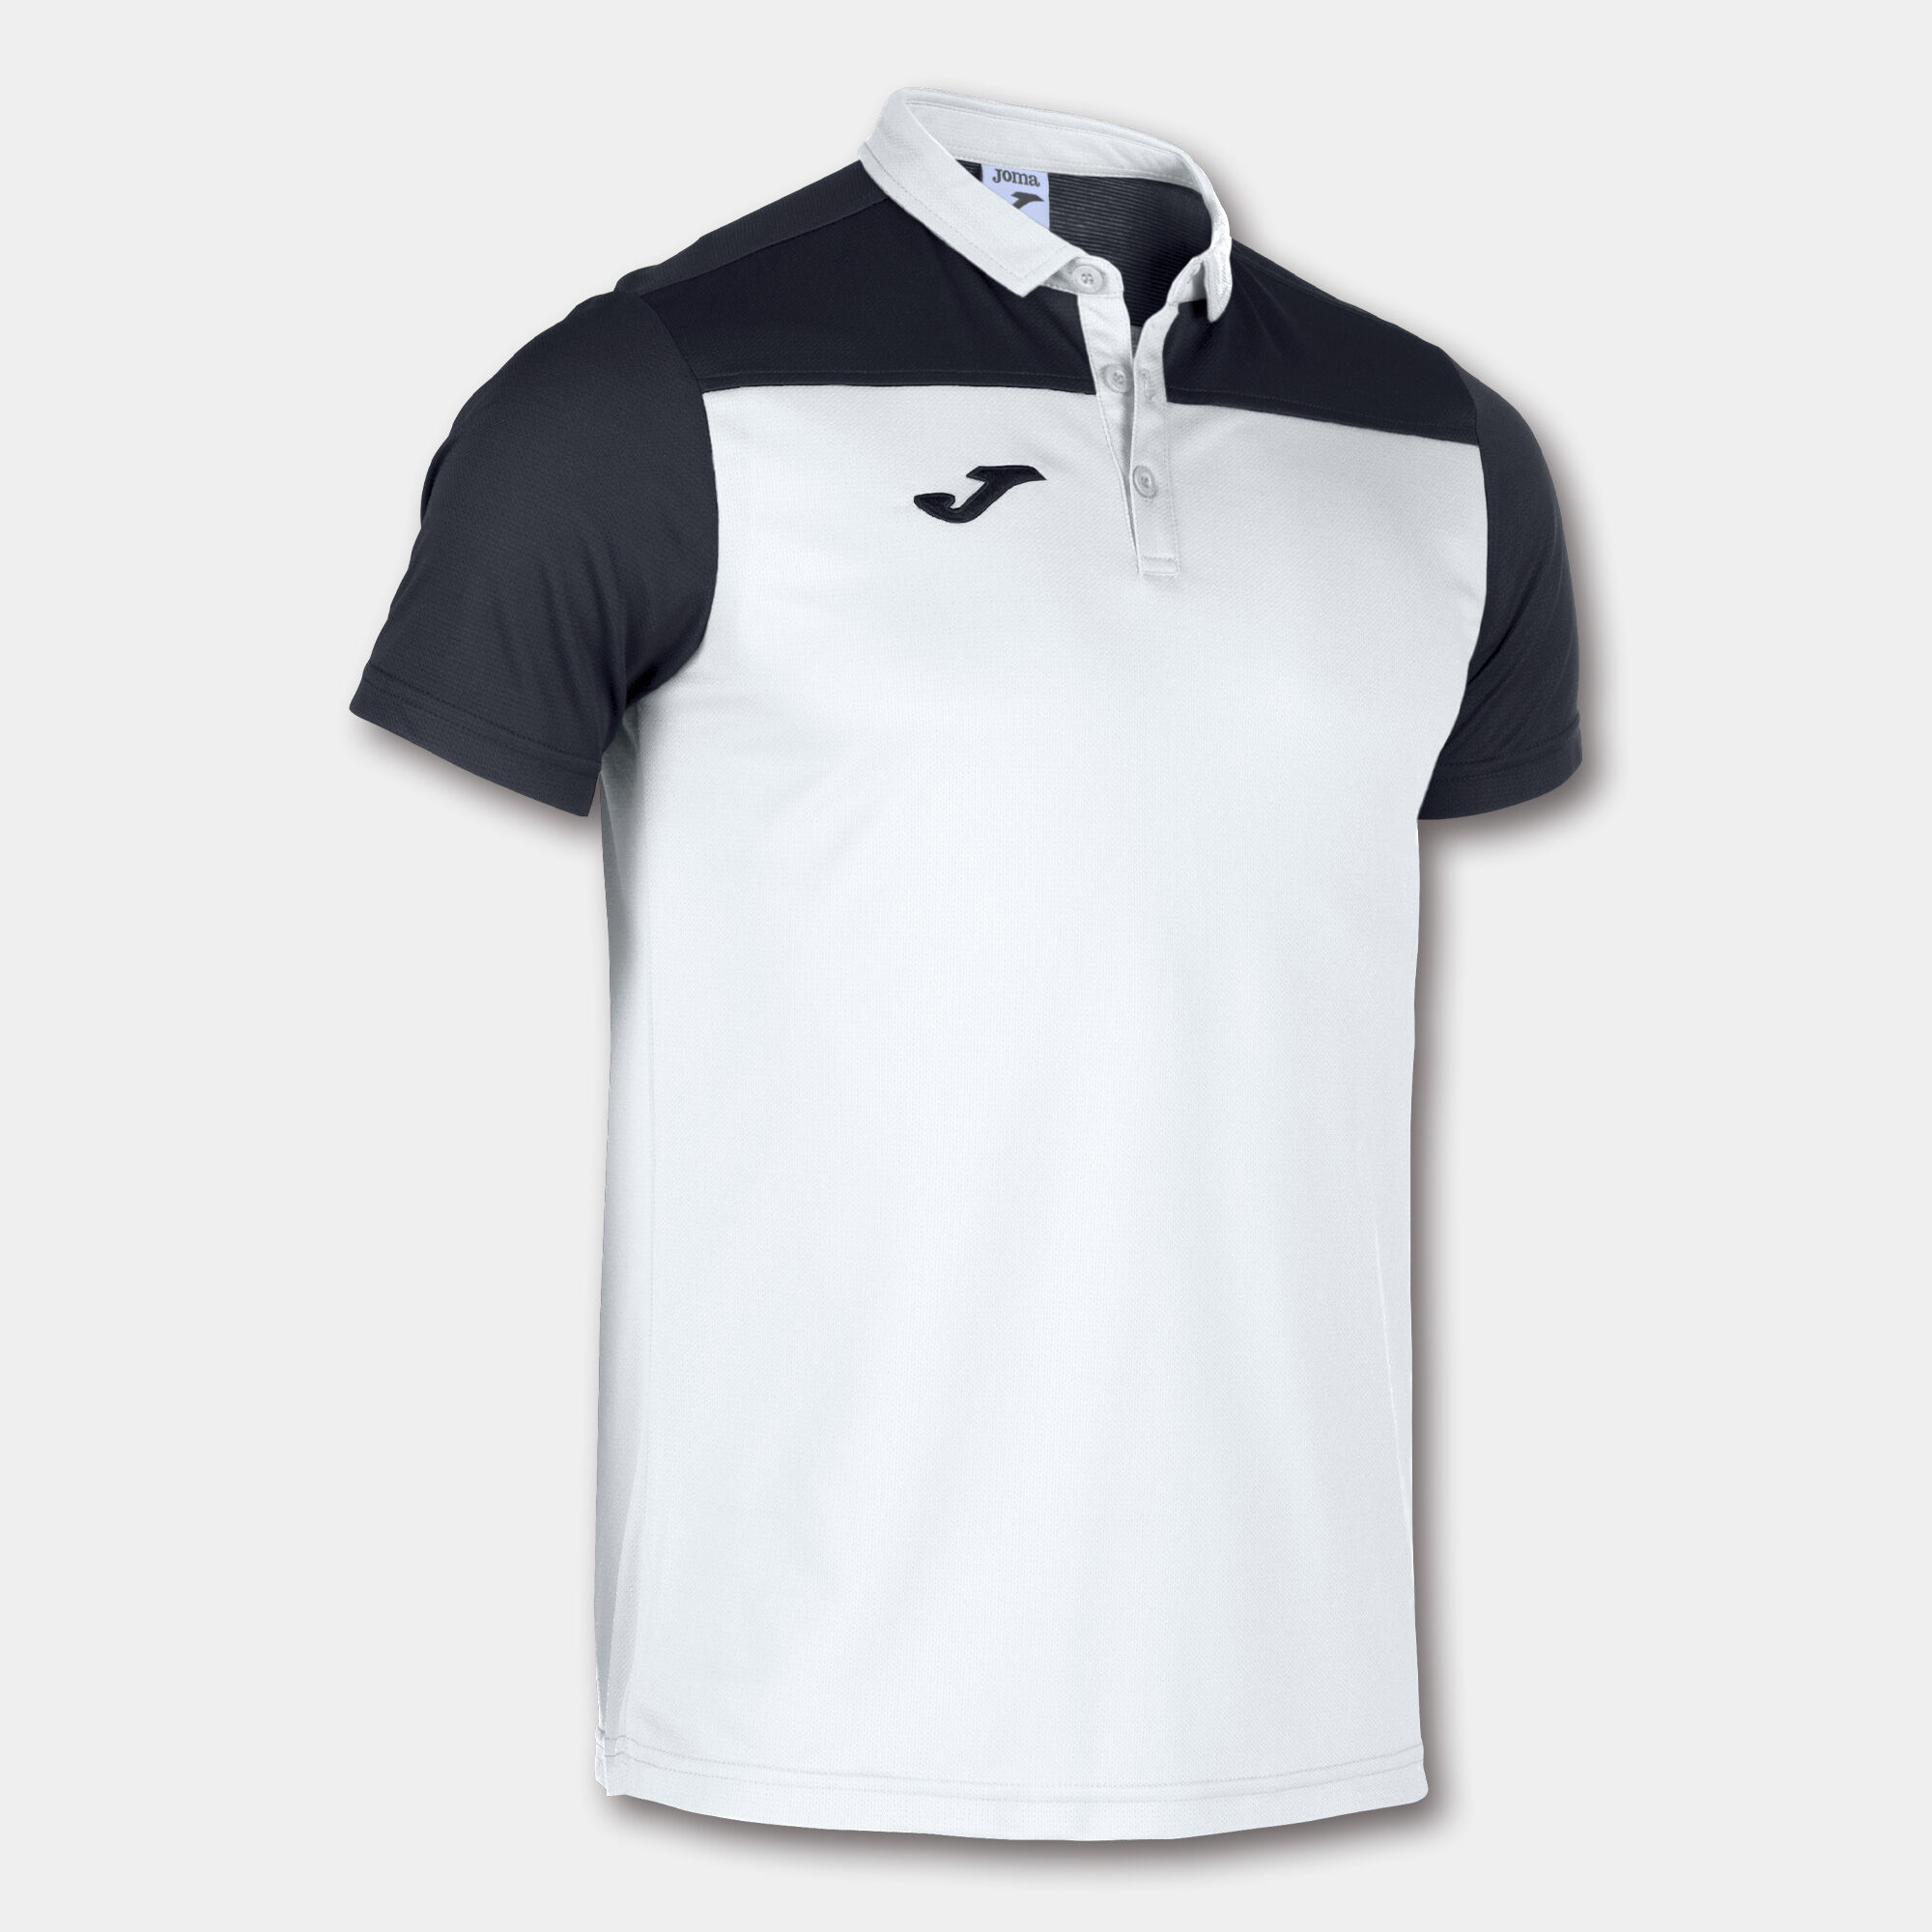 POLO MANCHES COURTES HOMME HOBBY II BLANC NOIR